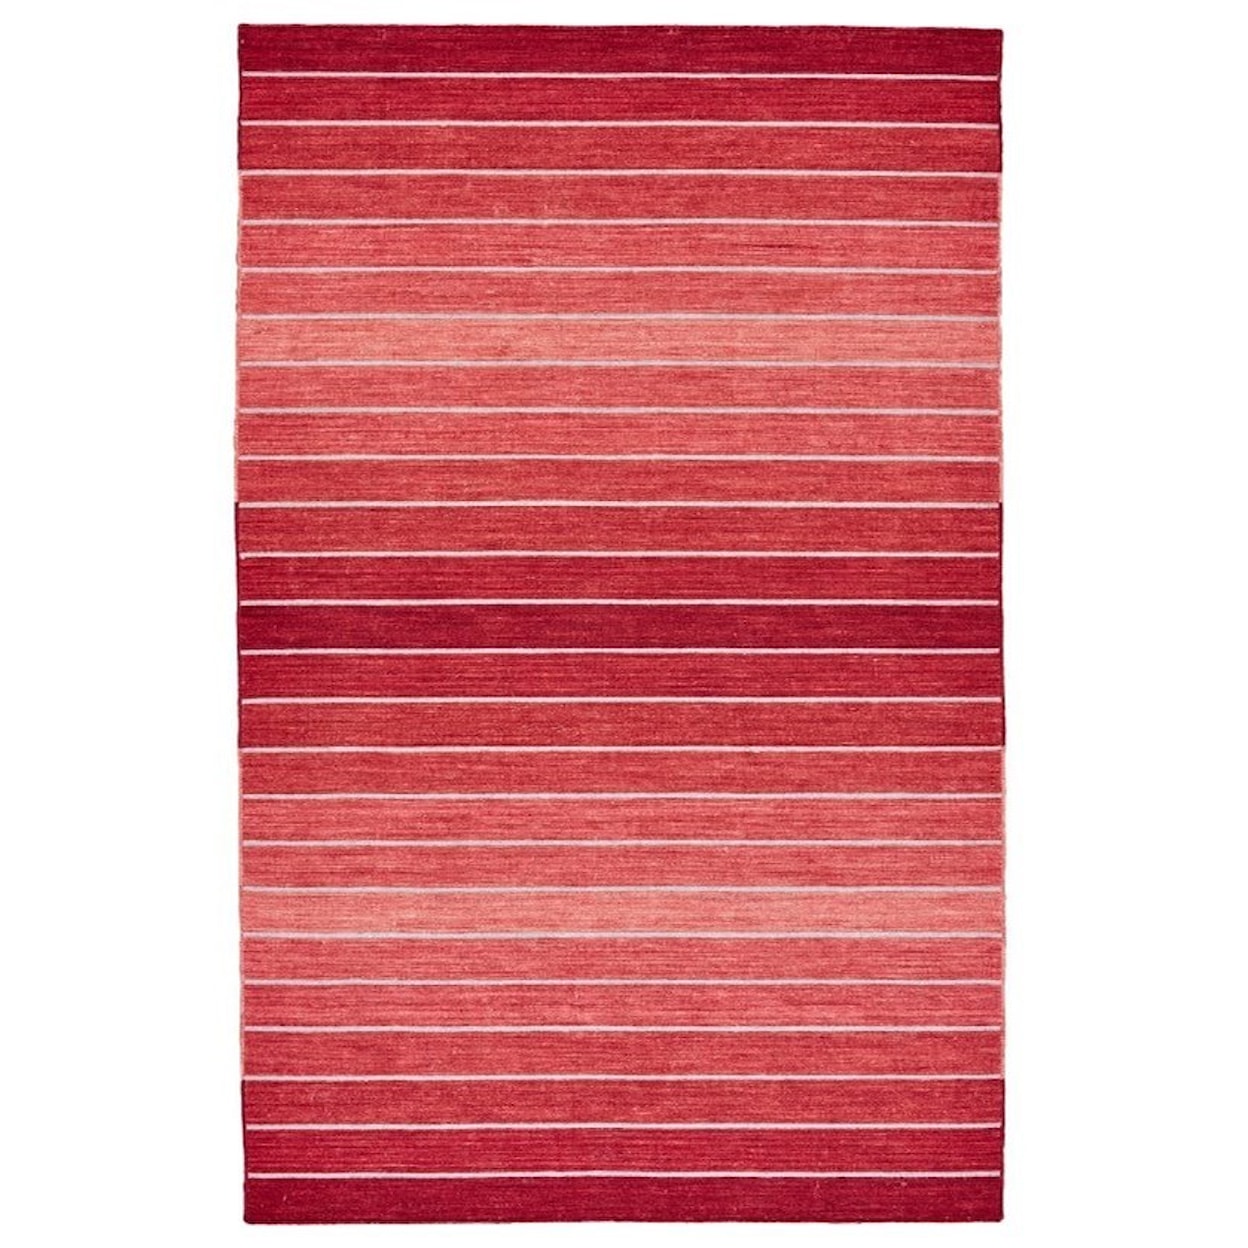 Feizy Rugs Santino Red 4' x 6' Area Rug